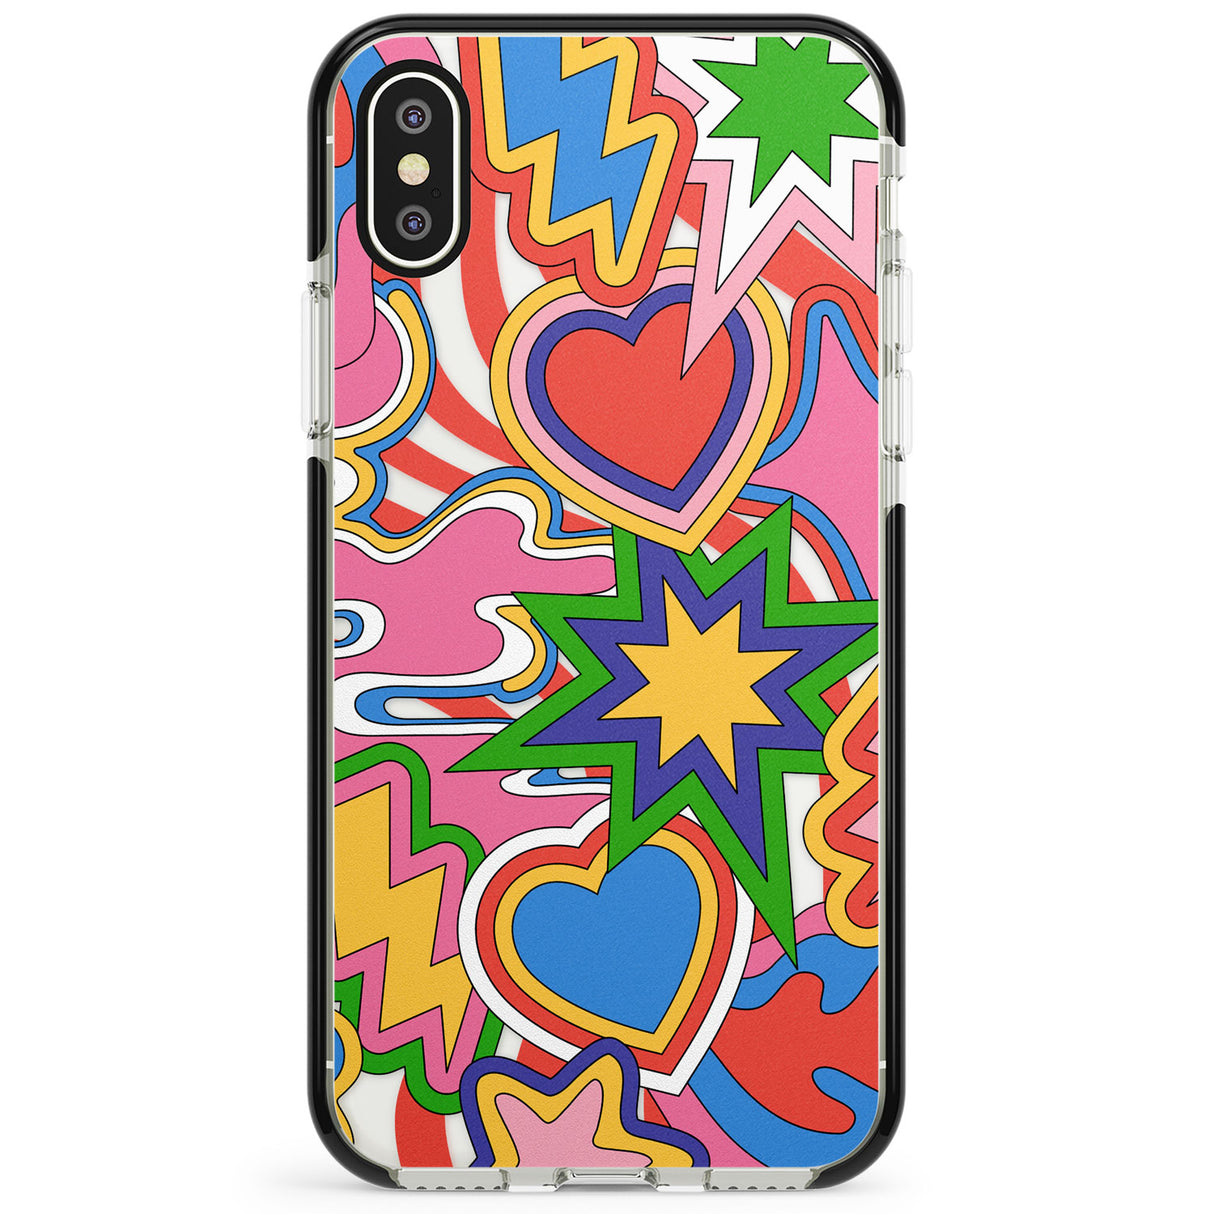 Psychedelic Pop Art Explosion Phone Case for iPhone X XS Max XR